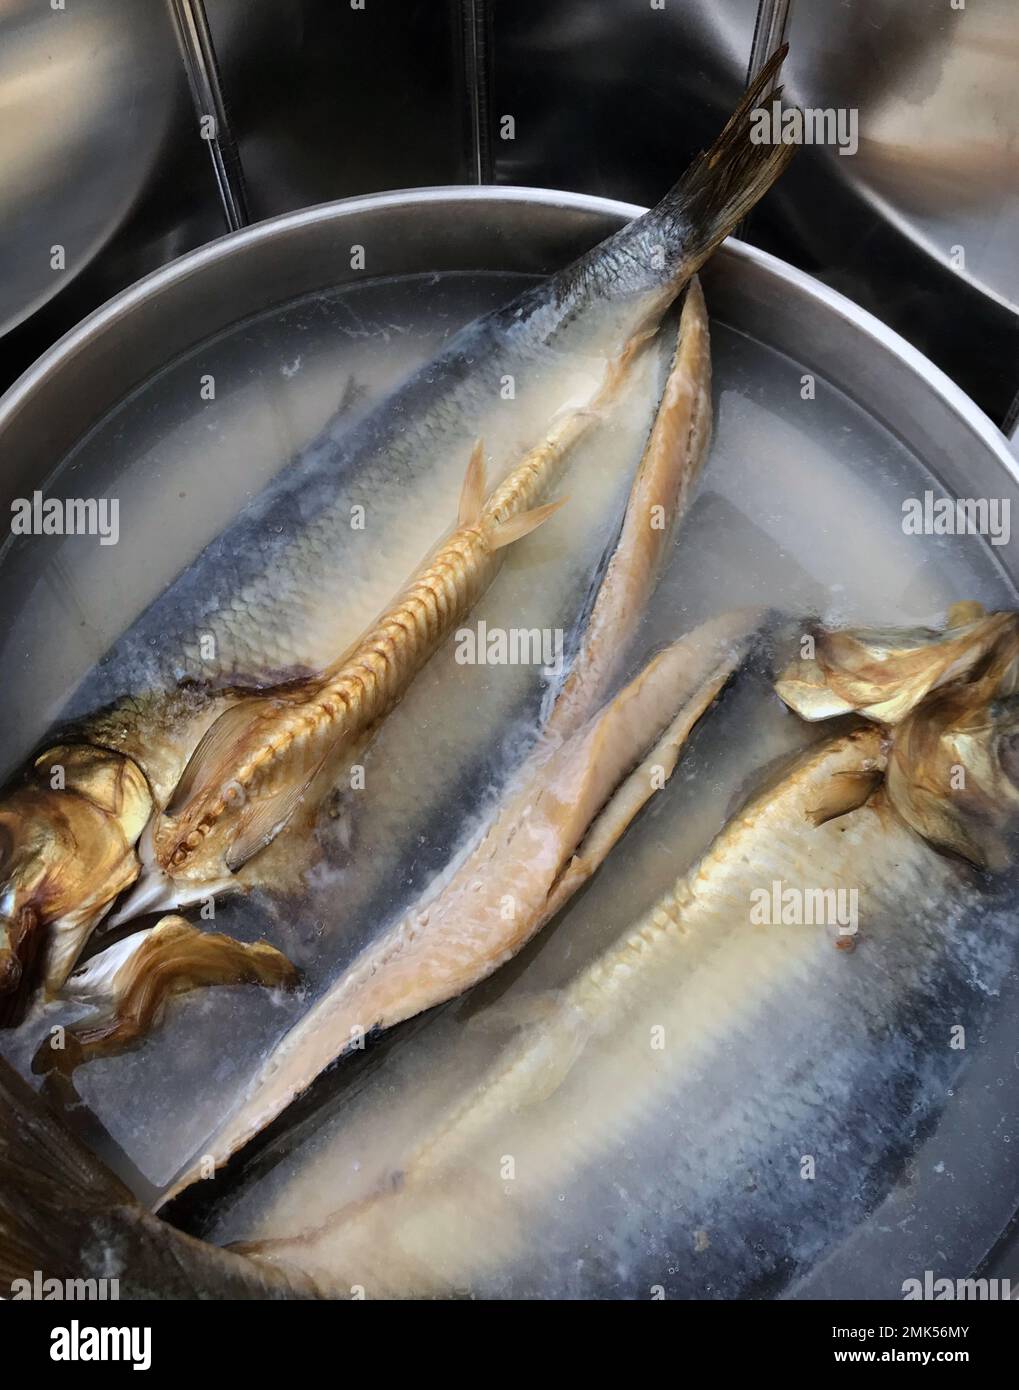 pair of kippers poaching in a stainless steel  frying pan Stock Photo